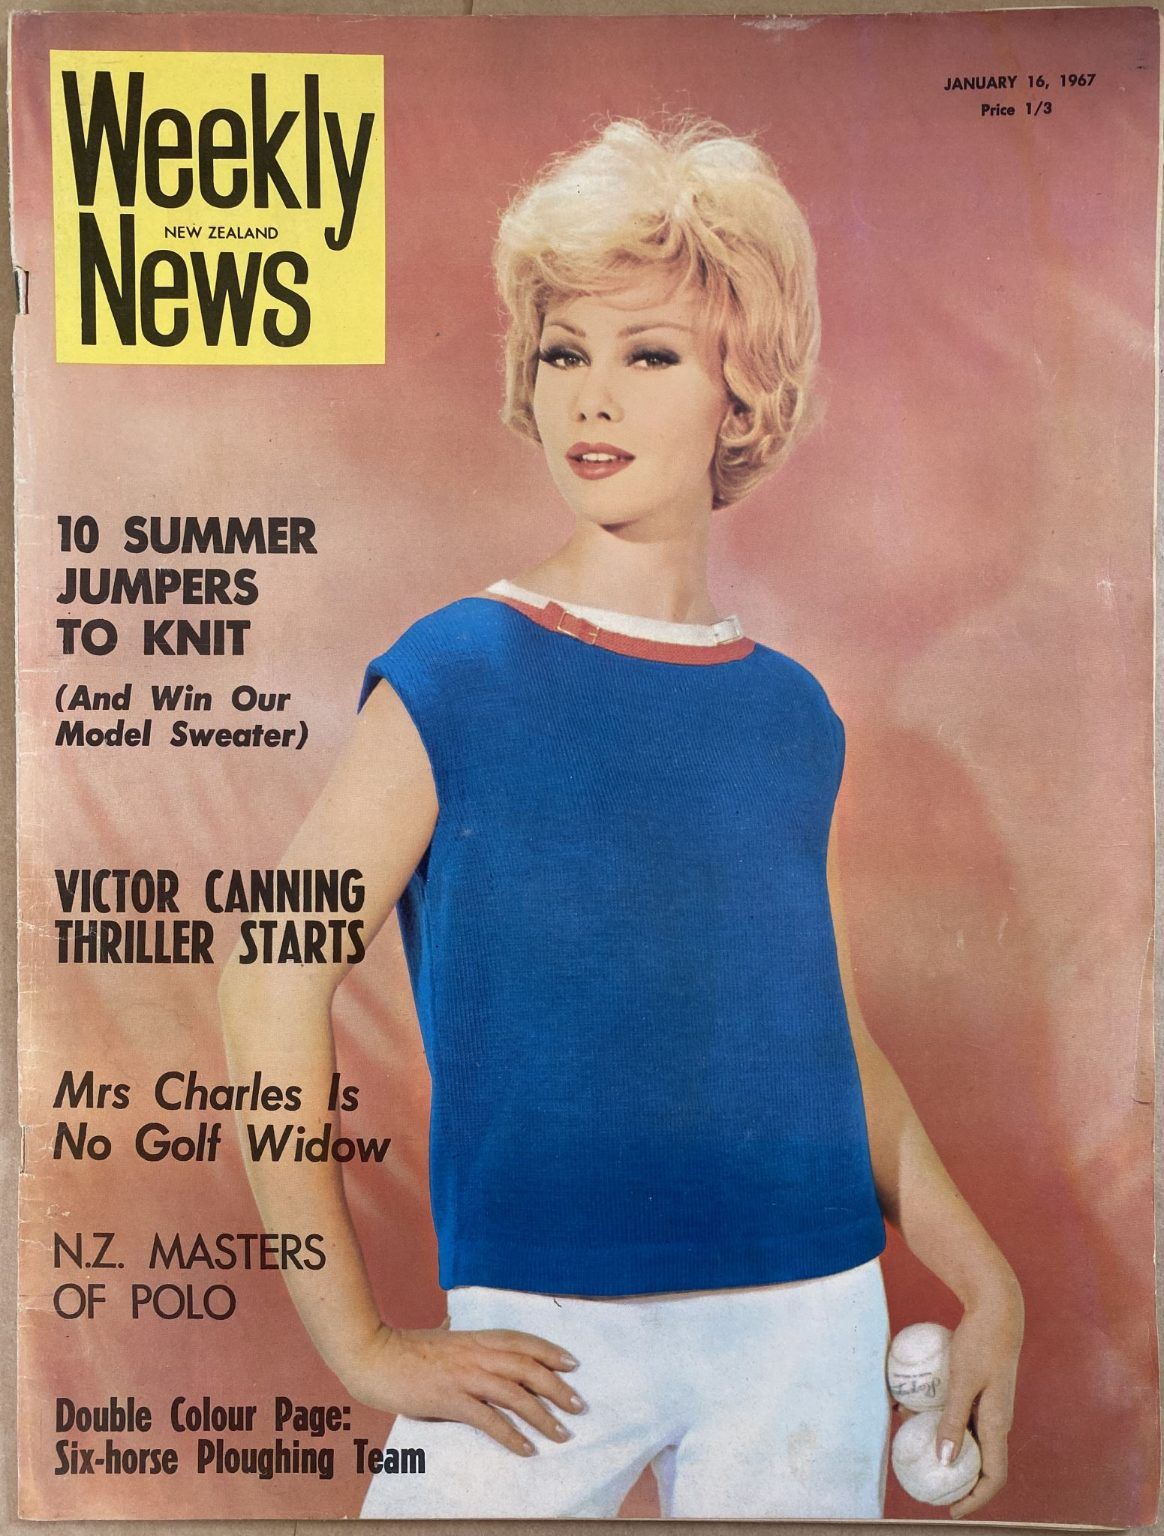 OLD NEWSPAPER: New Zealand Weekly News, No. 5382, 16 January 1967